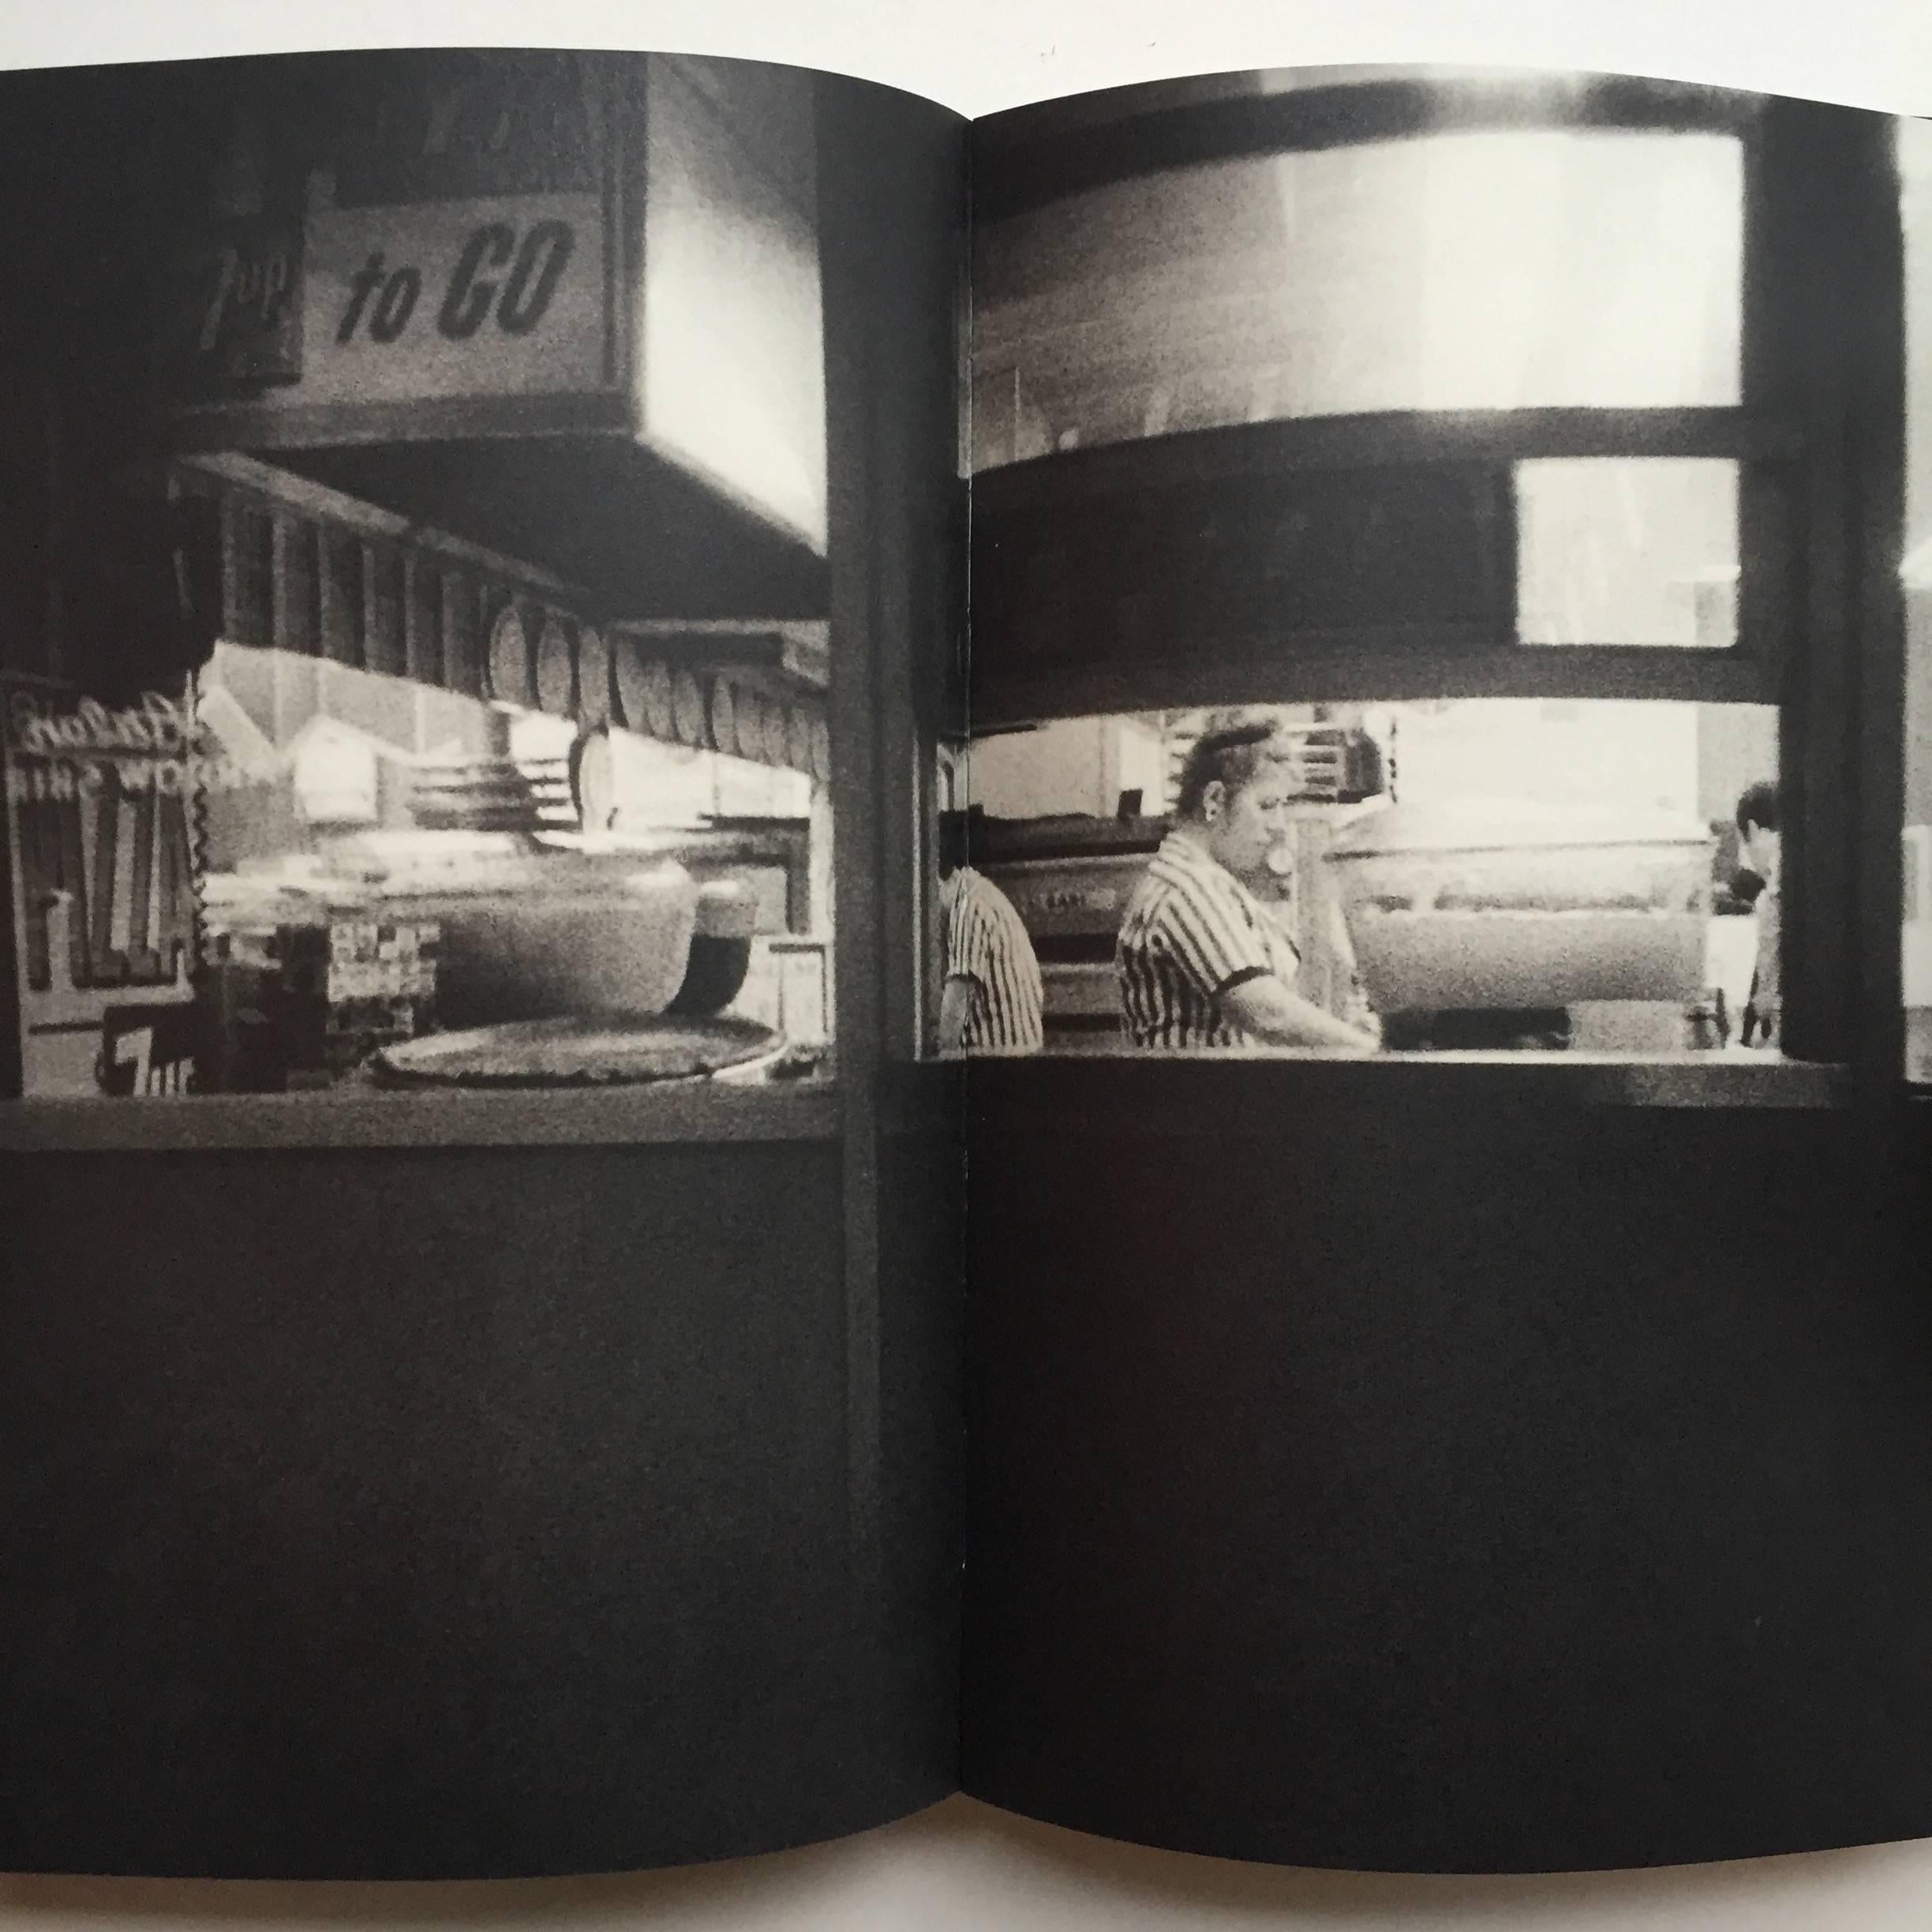 First edition, limited to 3000 copies, published by PPP Editions, New York, 2002. Signed by Daido Moriyama at title page.

“In 1971, Japanese photographer Daido Moriyama took a trip to New York City with Tadanori Yokoo. He stayed at the Chelsea